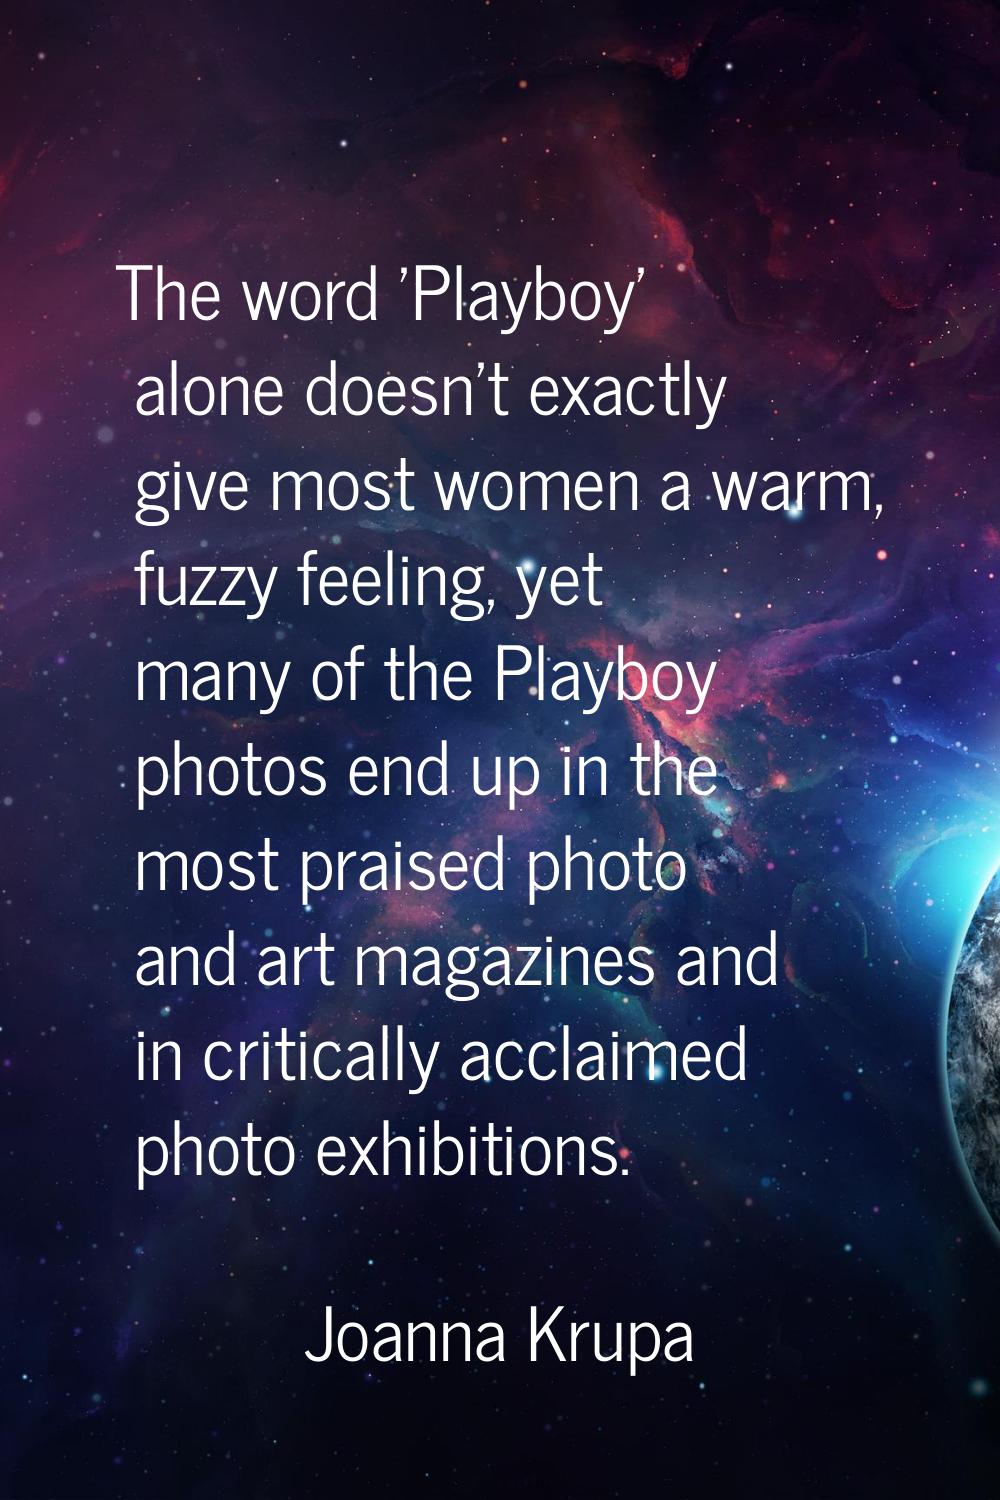 The word 'Playboy' alone doesn't exactly give most women a warm, fuzzy feeling, yet many of the Pla